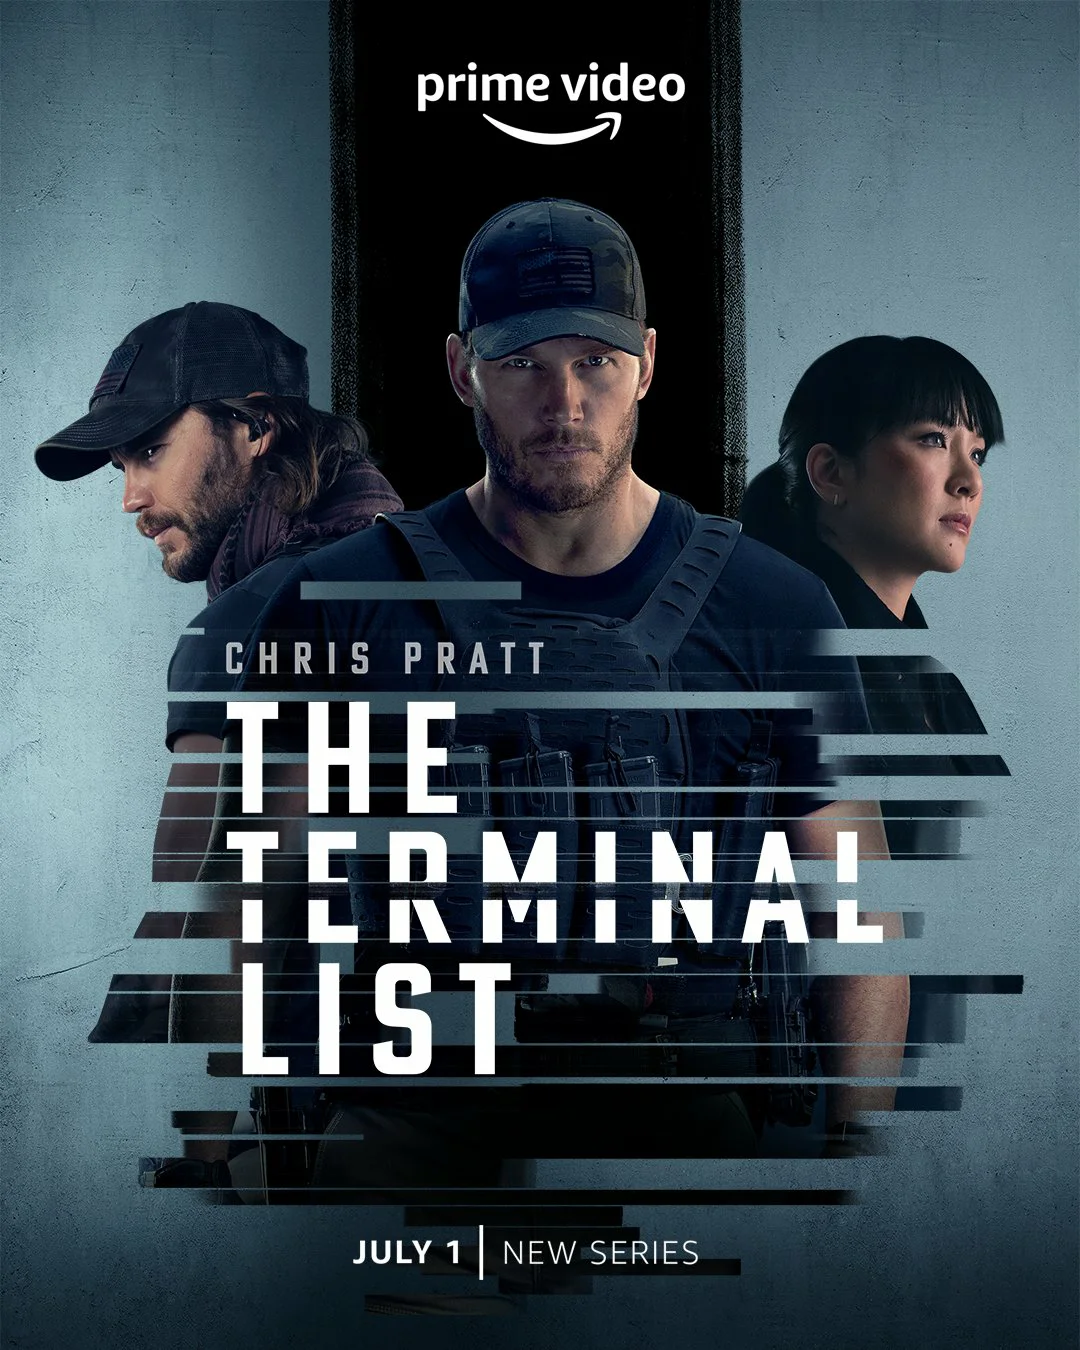 "The Terminal List" released the official trailer and new poster, it will be on Prime Video on July 1